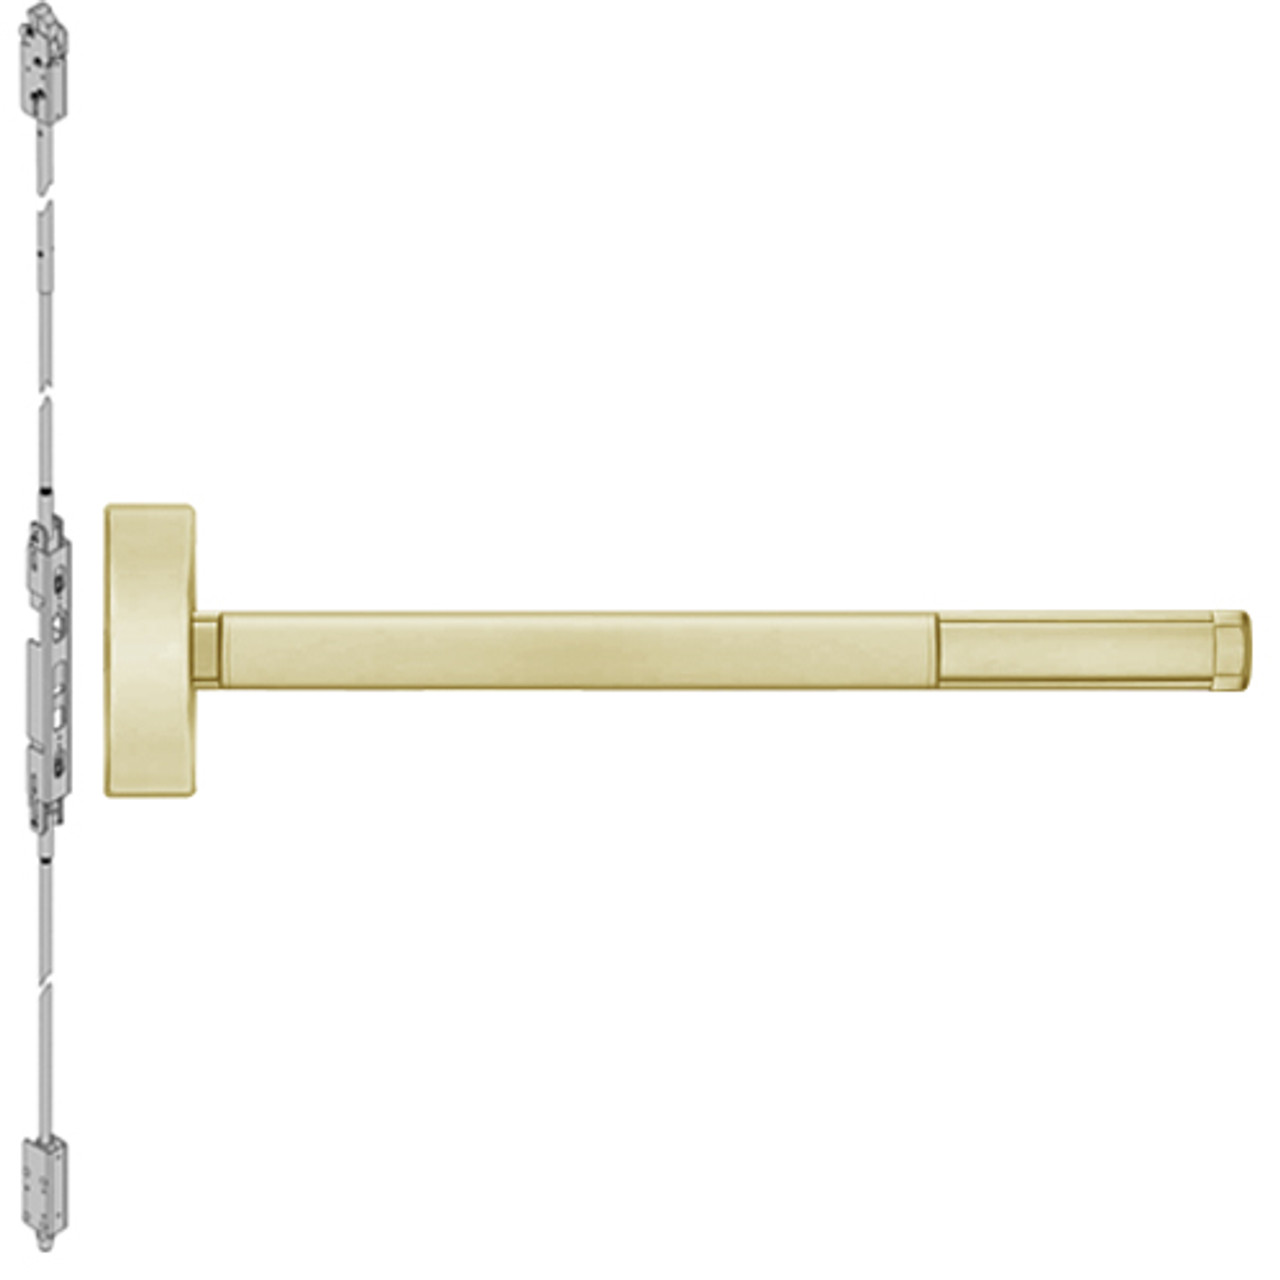 ELR2805LBR-606-36 PHI 2800 Series Concealed Vertical Rod Exit Device with Electric Latch Retraction Prepped for Key Controls Thumb Piece in Satin Brass Finish